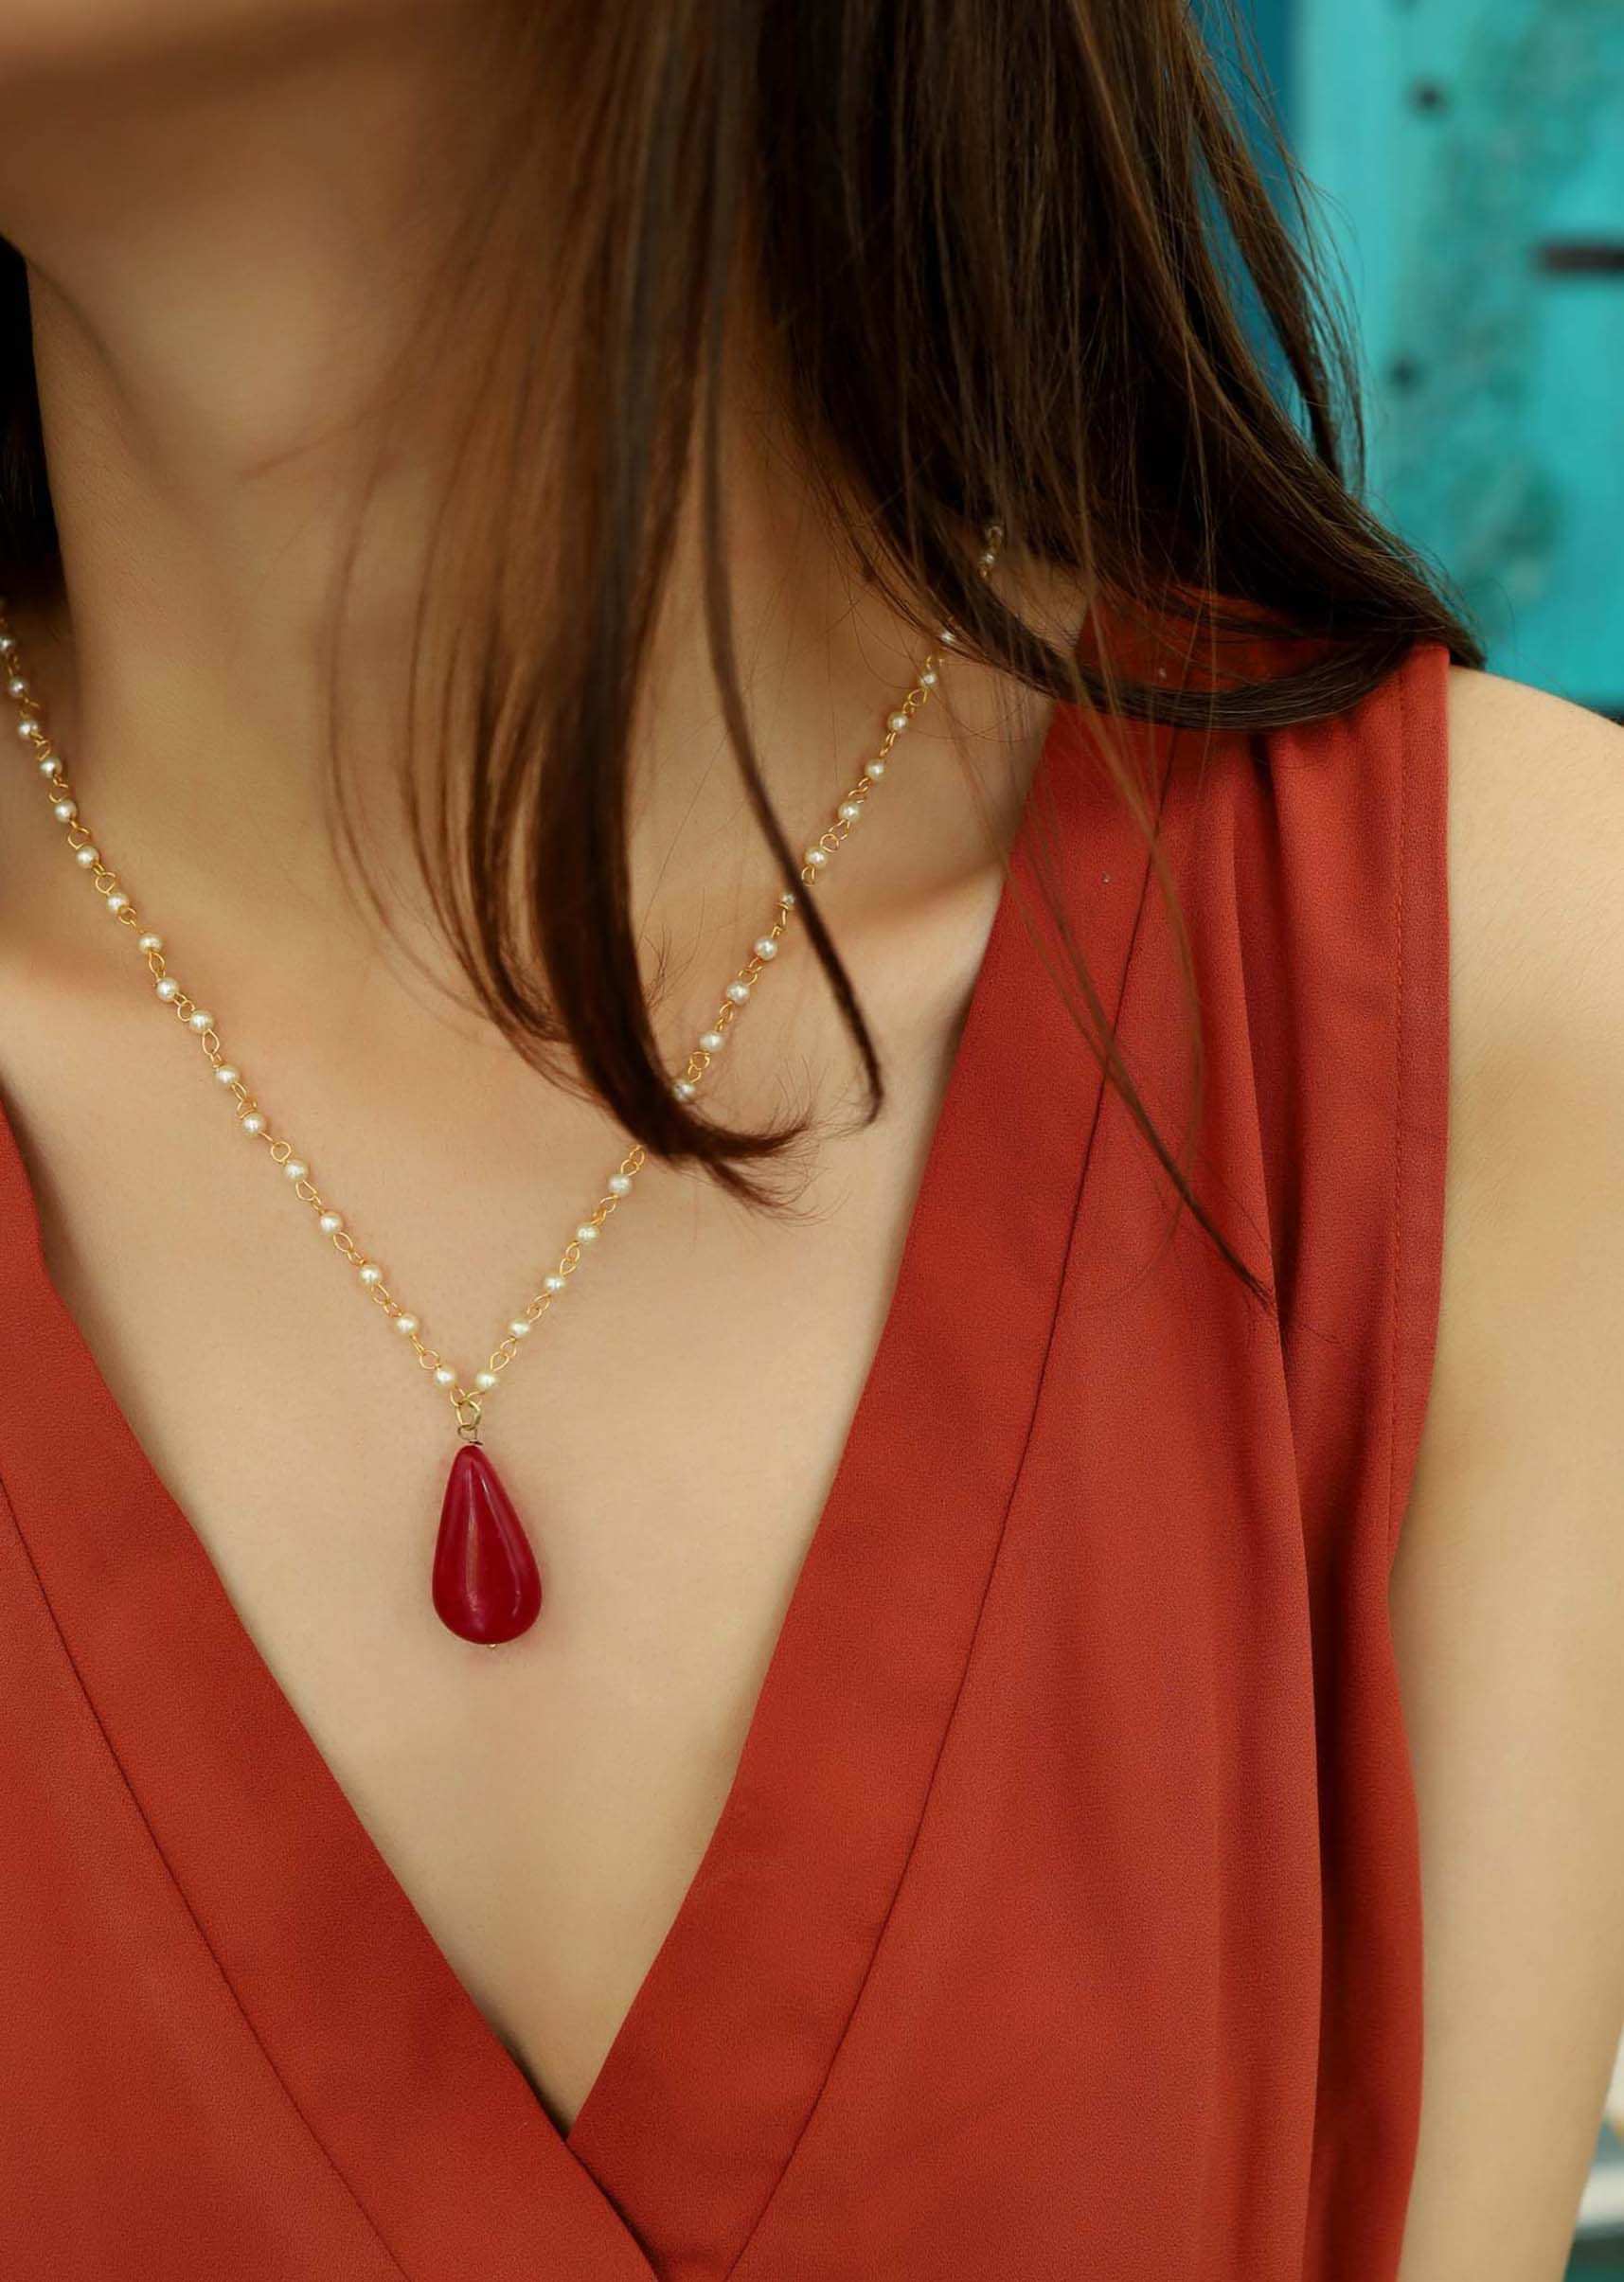 Pearl Necklace With A Red Stone Drop Pendant In The Centre